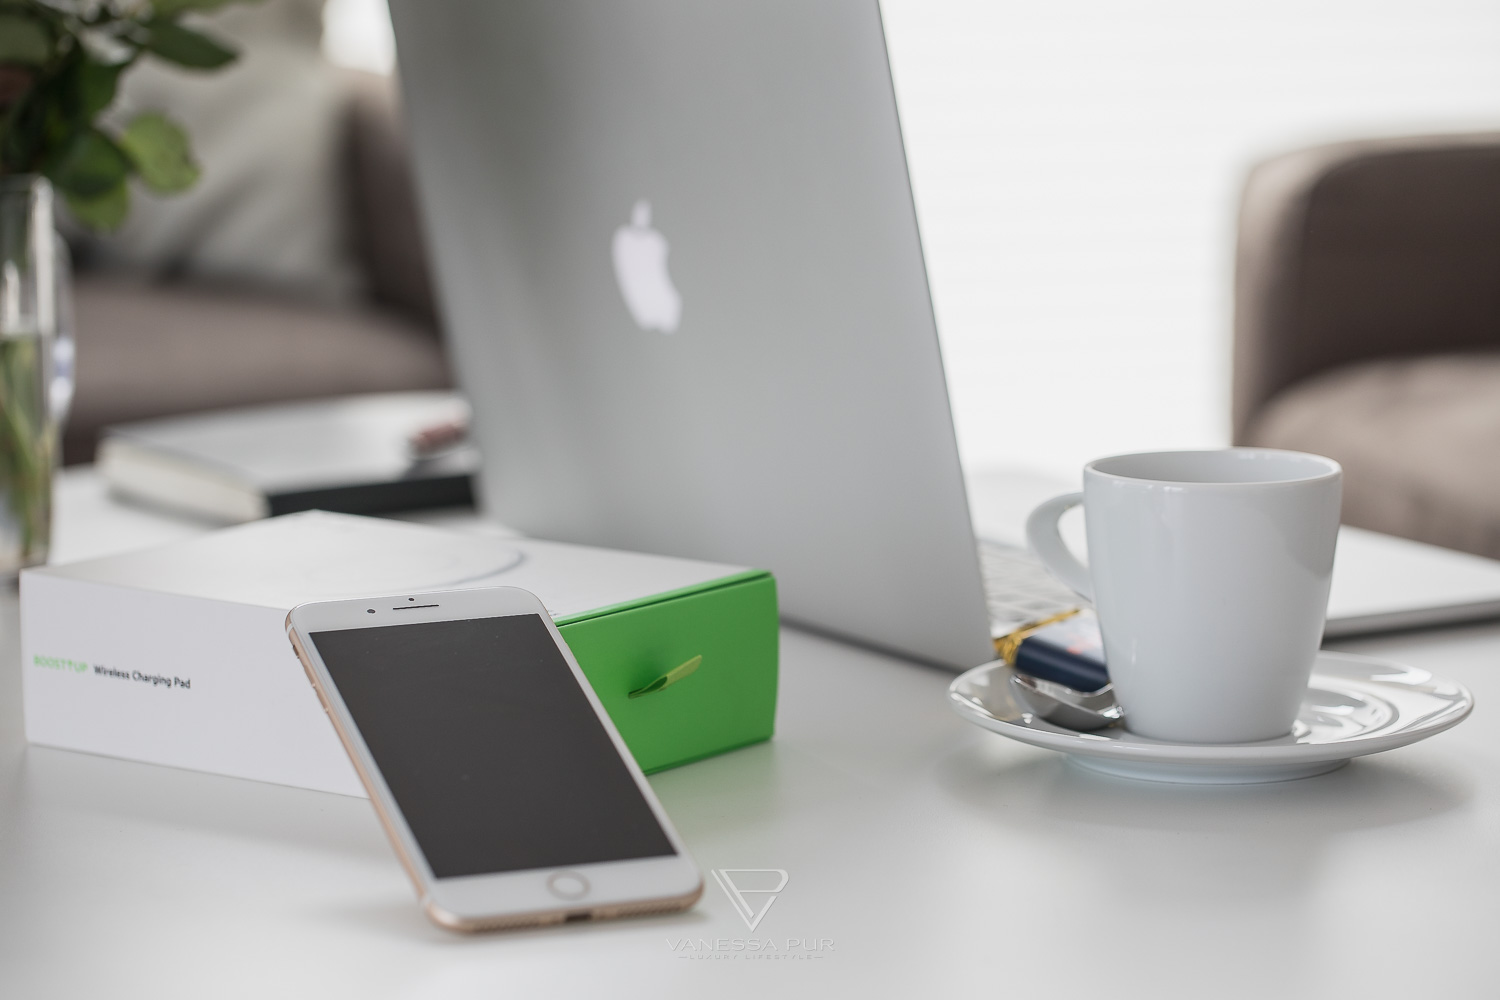 Belkin Boost Up Wireless Charging Station for iPhones in review - Qi Charger - Technology blog - Smartphone blogger - Lifestyle blog - Product test - Rating